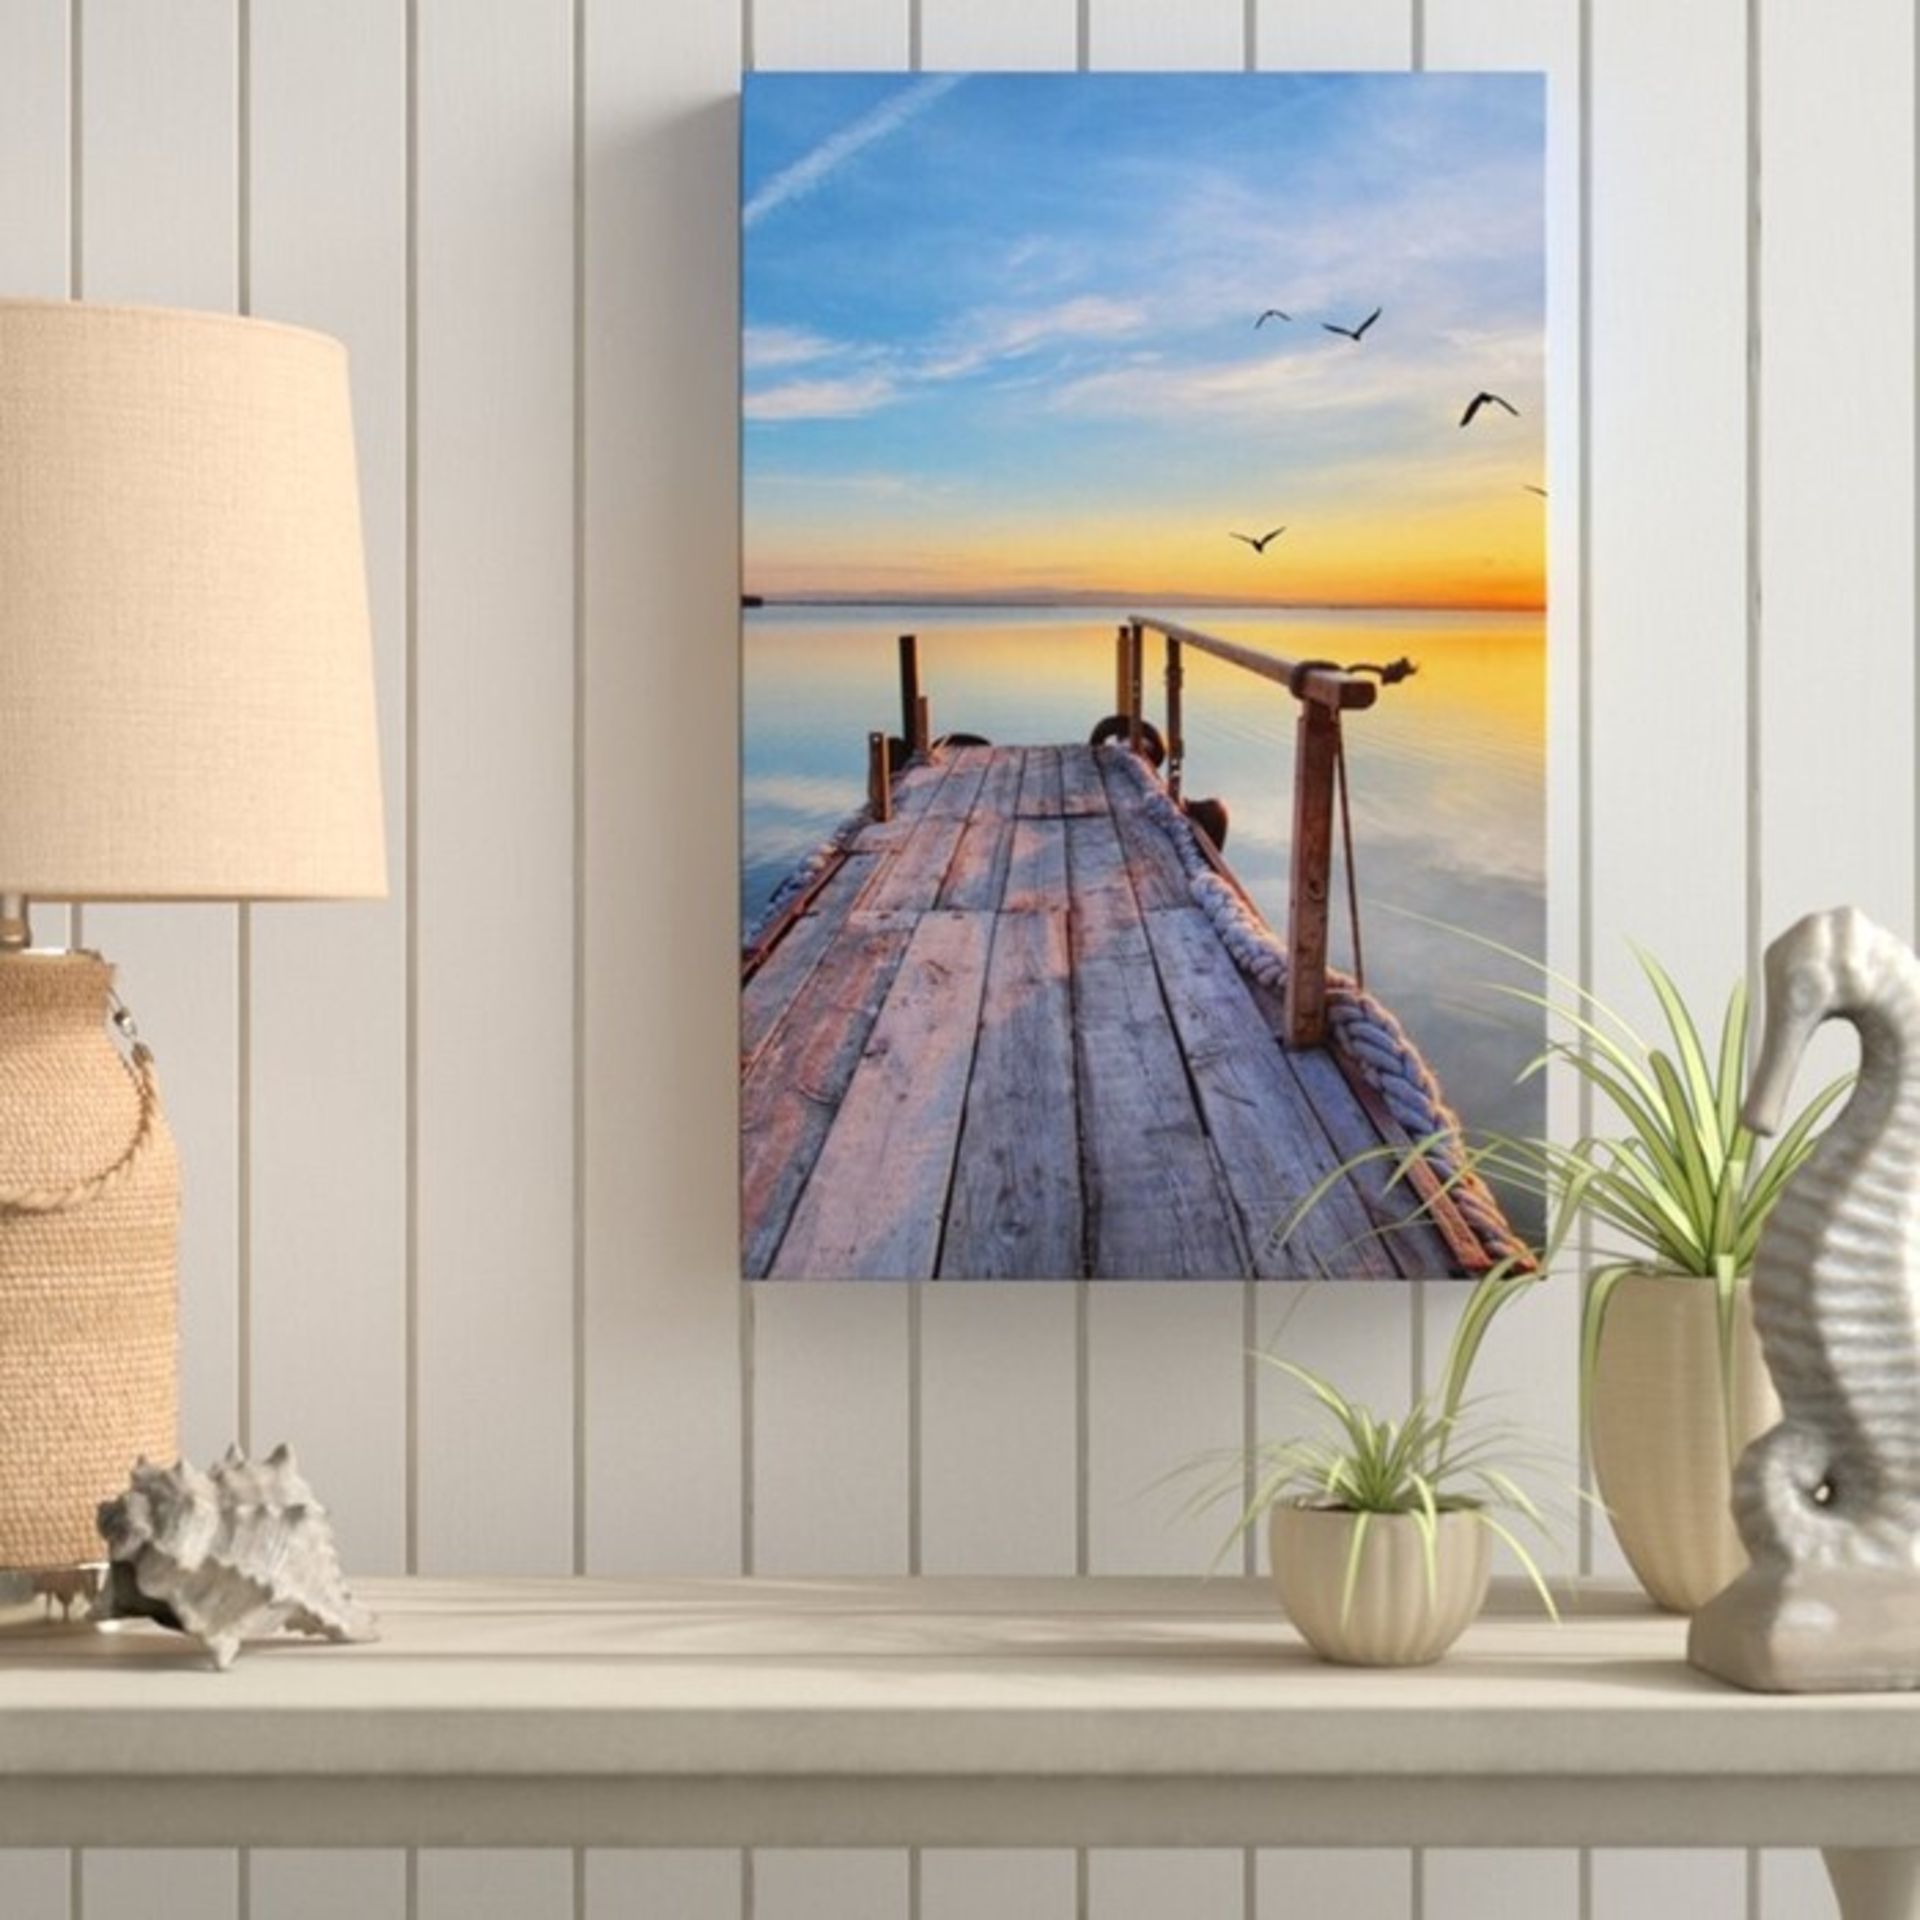 East Urban Home, Small Ancient Walkway to the Ocean at Sunset Photographic Print on Canvas (60X40CM)